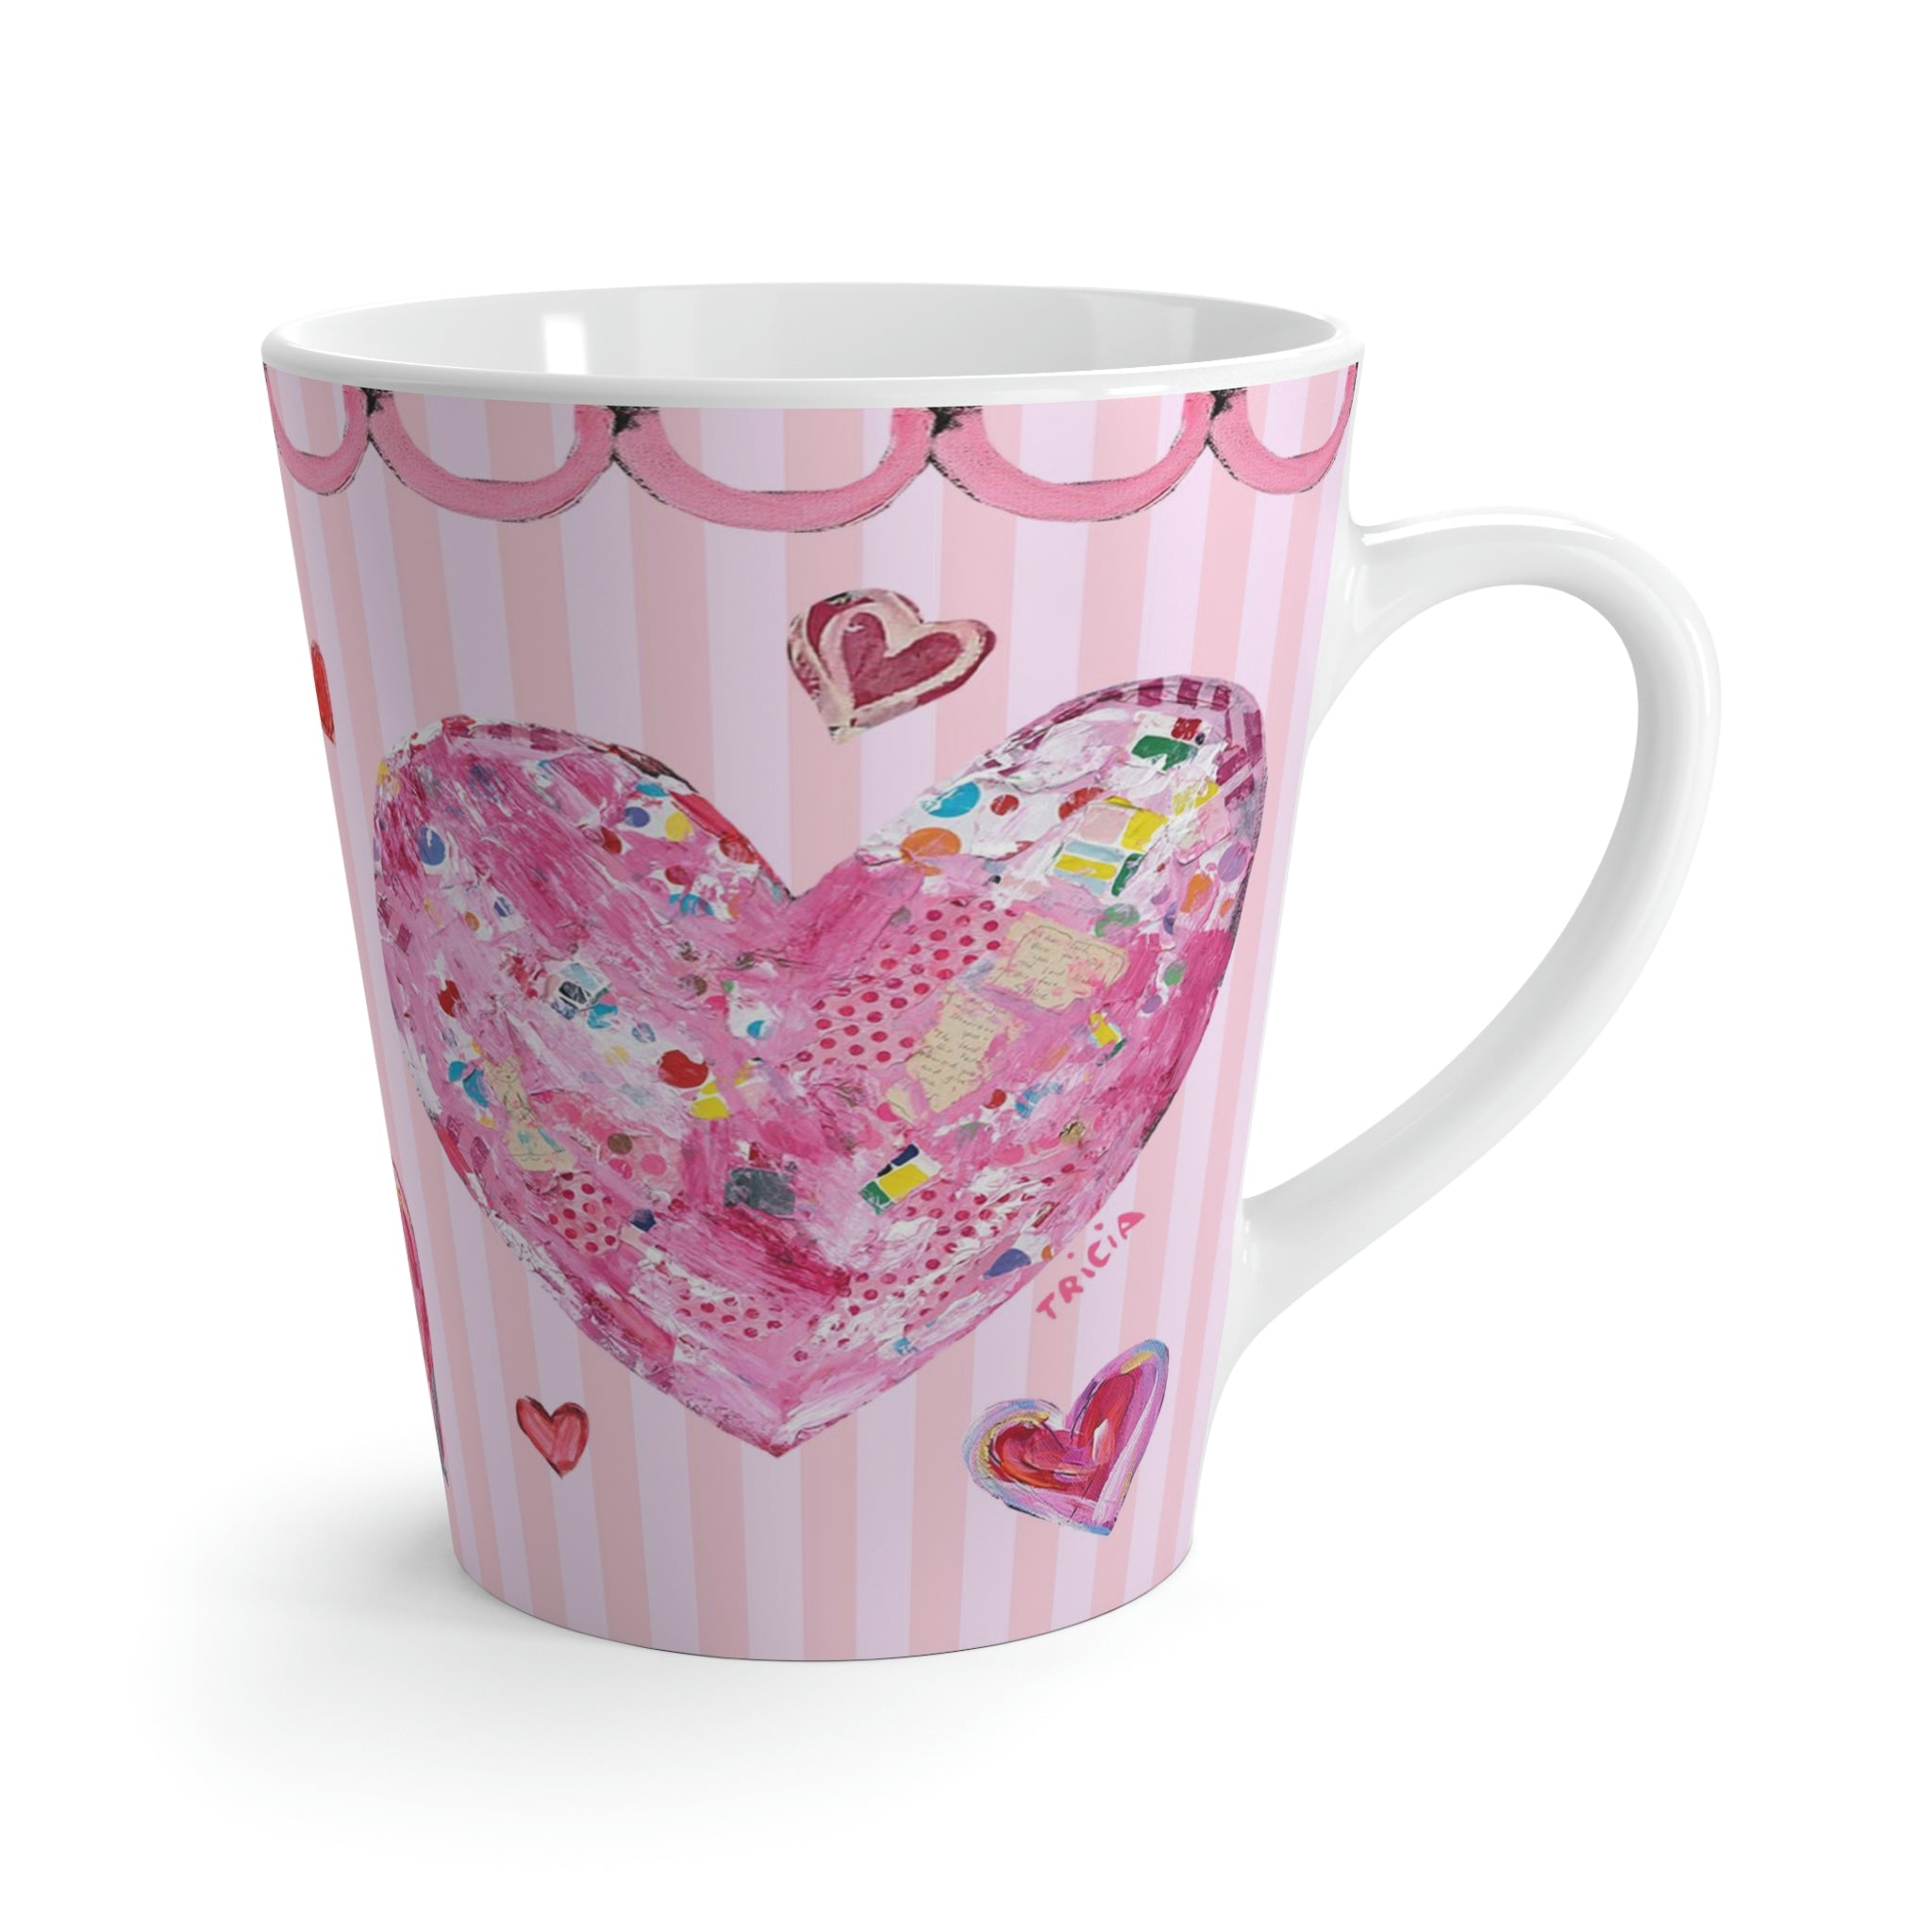 Coffee Is My BFF Rose Gold Heart Two-Tone Pink Porcelain Travel